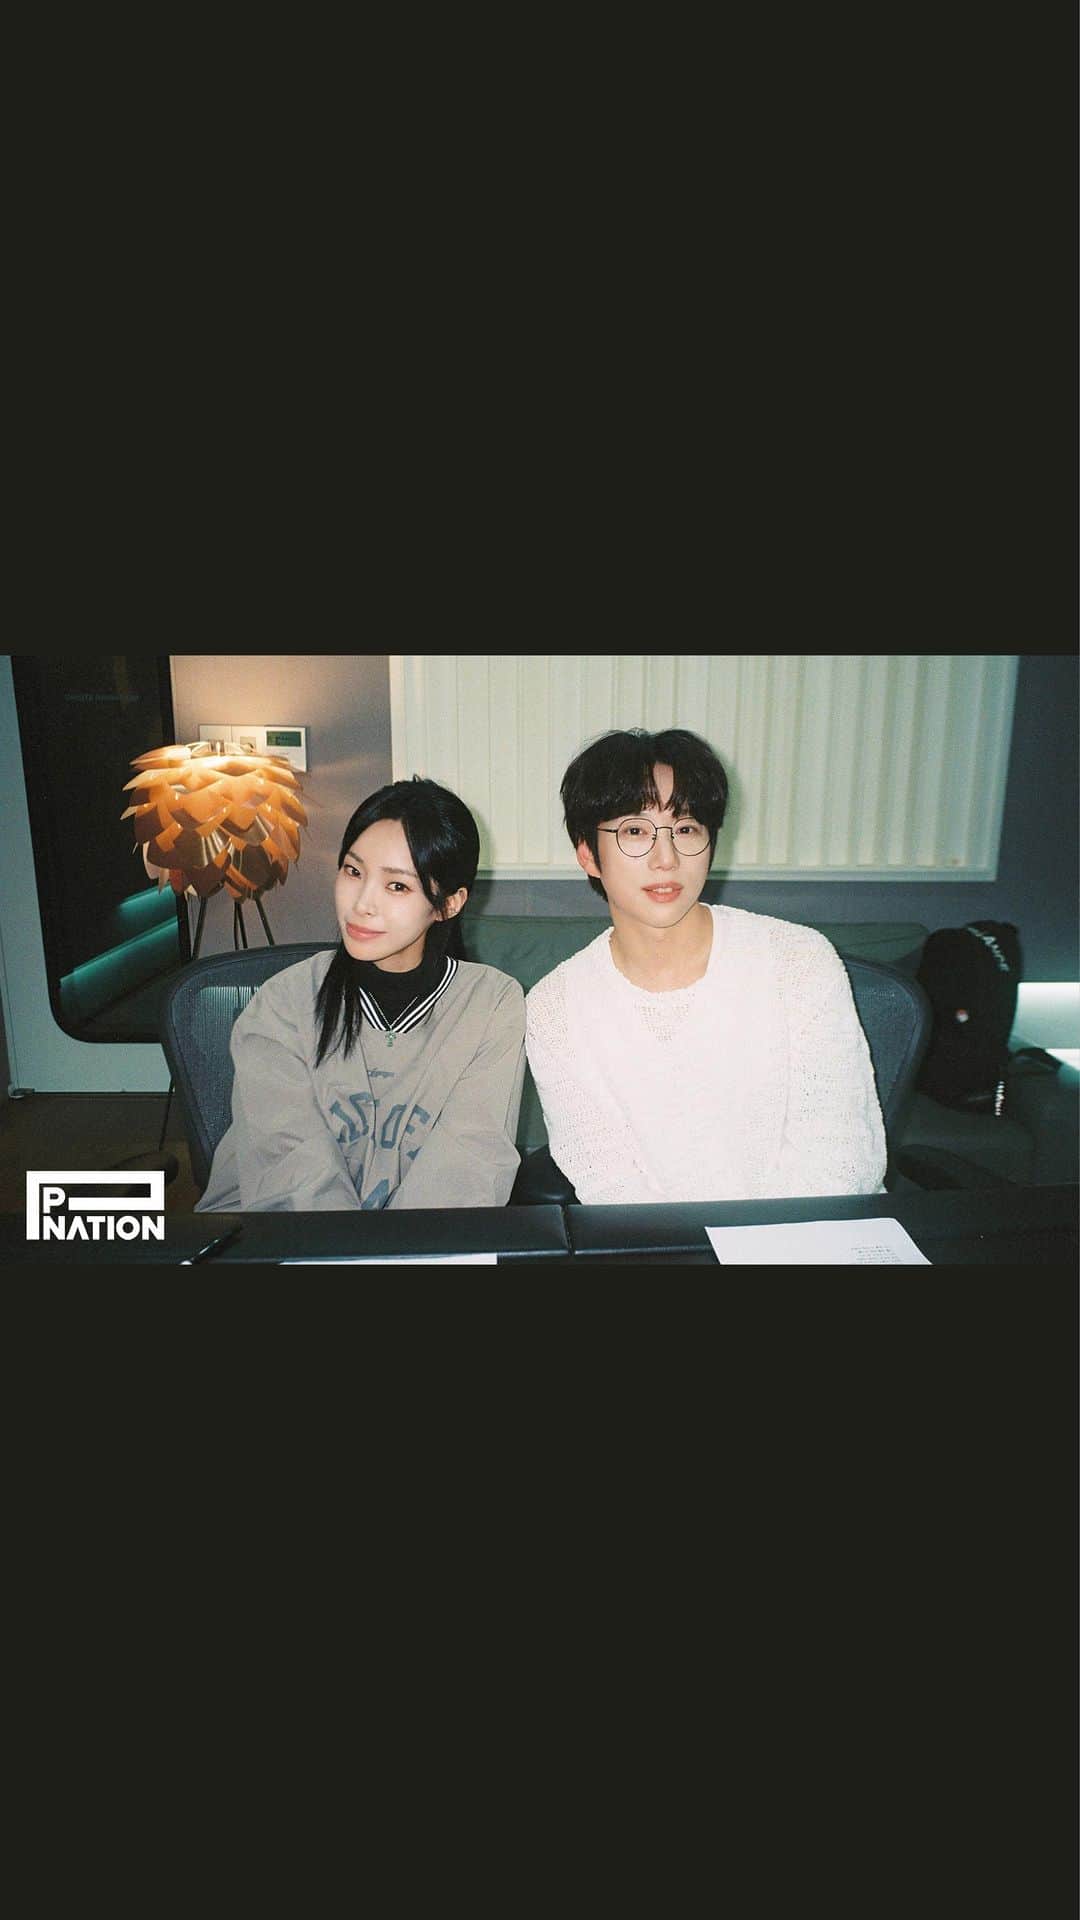 Heizeのインスタグラム：「[Heize] 헤이즈&10CM Interview I 입술 (Feat. 10CM) Behind Story I The 8th Mini Album [Last Winter]  풀버전은 헤이즈 official Youtube에서 확인하실 수 있습니다. 🔗 https://youtu.be/Oa5279xqq3c   헤이즈(Heize) The 8th Mini Album [Last Winter] 2023.12.07 (Thu) 6PM KST  @heizeheize from @pnation.official Feat. @hi990103  #헤이즈 #Heize #LastWinter #라스트윈터 #입술 #10CM #권정열 #십센치 #231207_6pmKST #PNATION #피네이션」